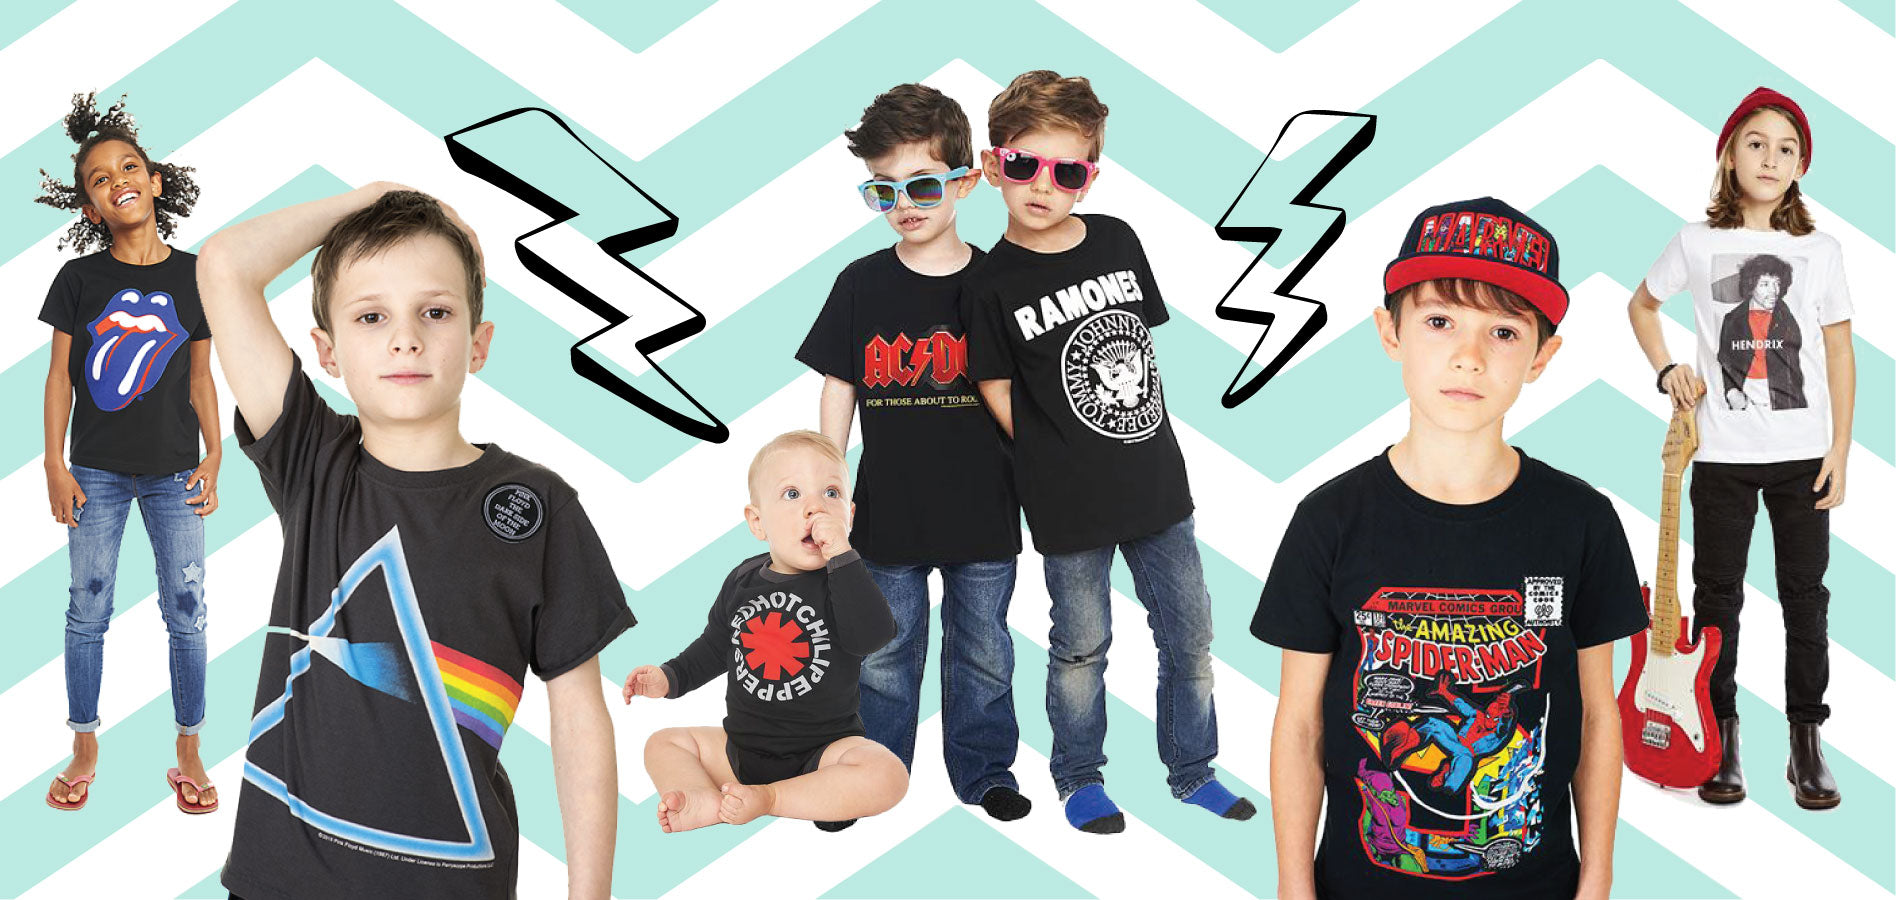 Cool Kids Rock Band T-Shirts, Hoodies and Babygrows from KidVicious.co.uk